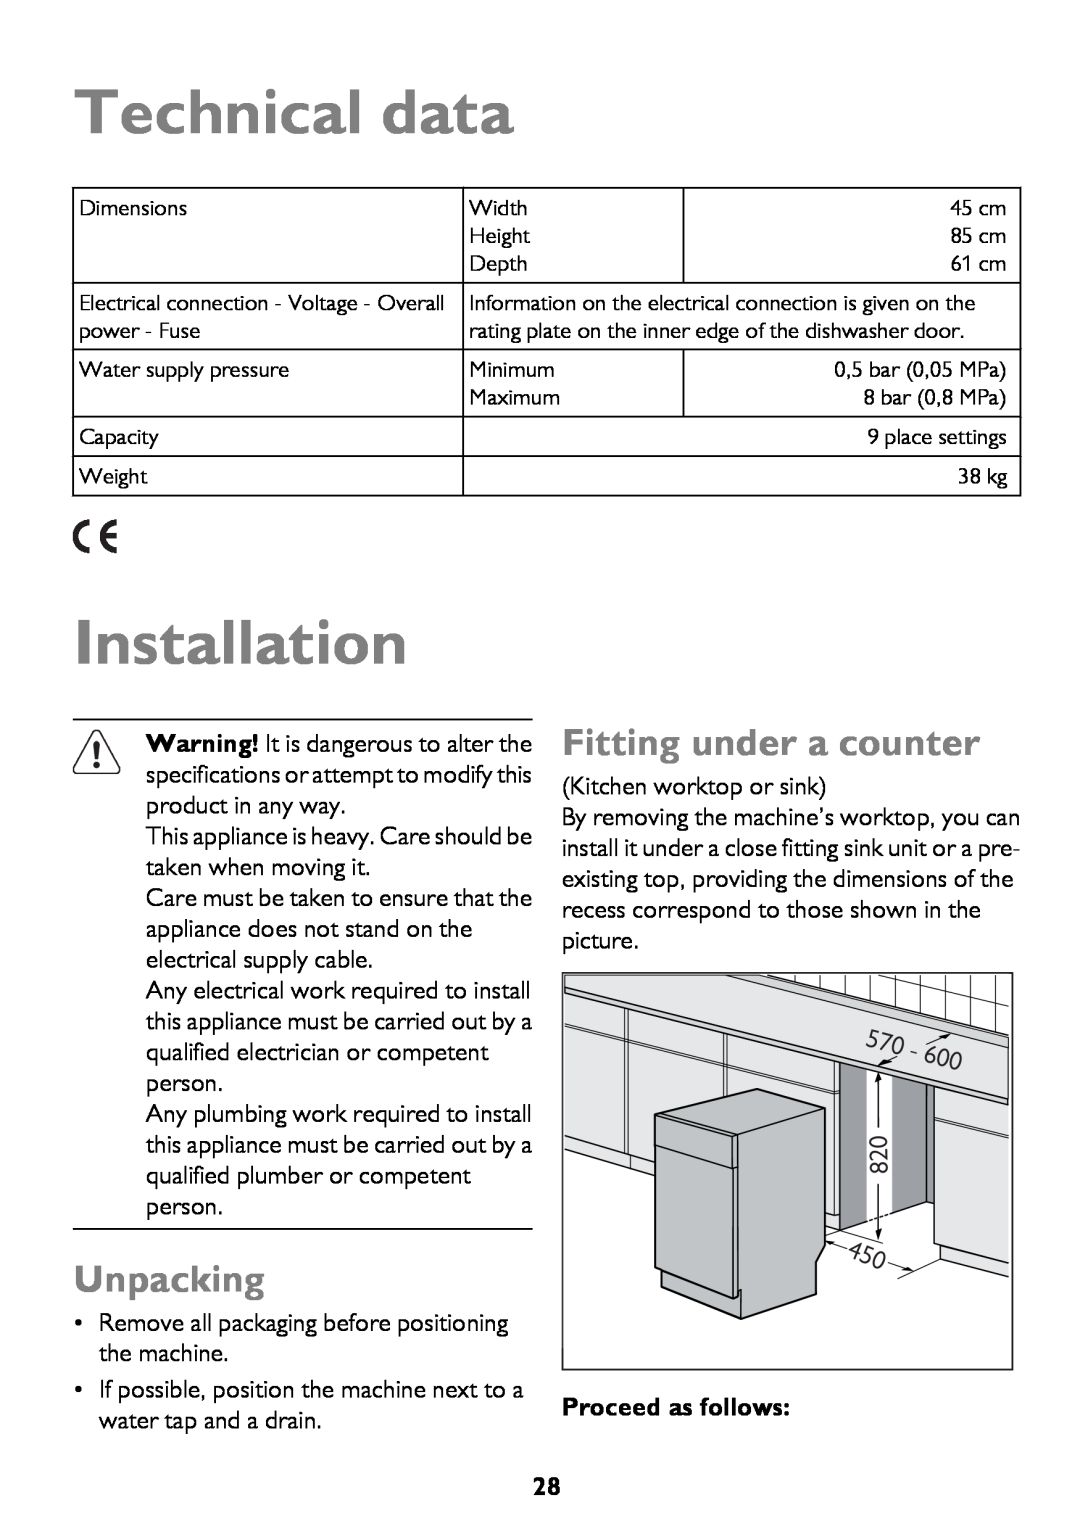 John Lewis JLDWW 906 instruction manual Technical data, Installation, Unpacking, Fitting under a counter 